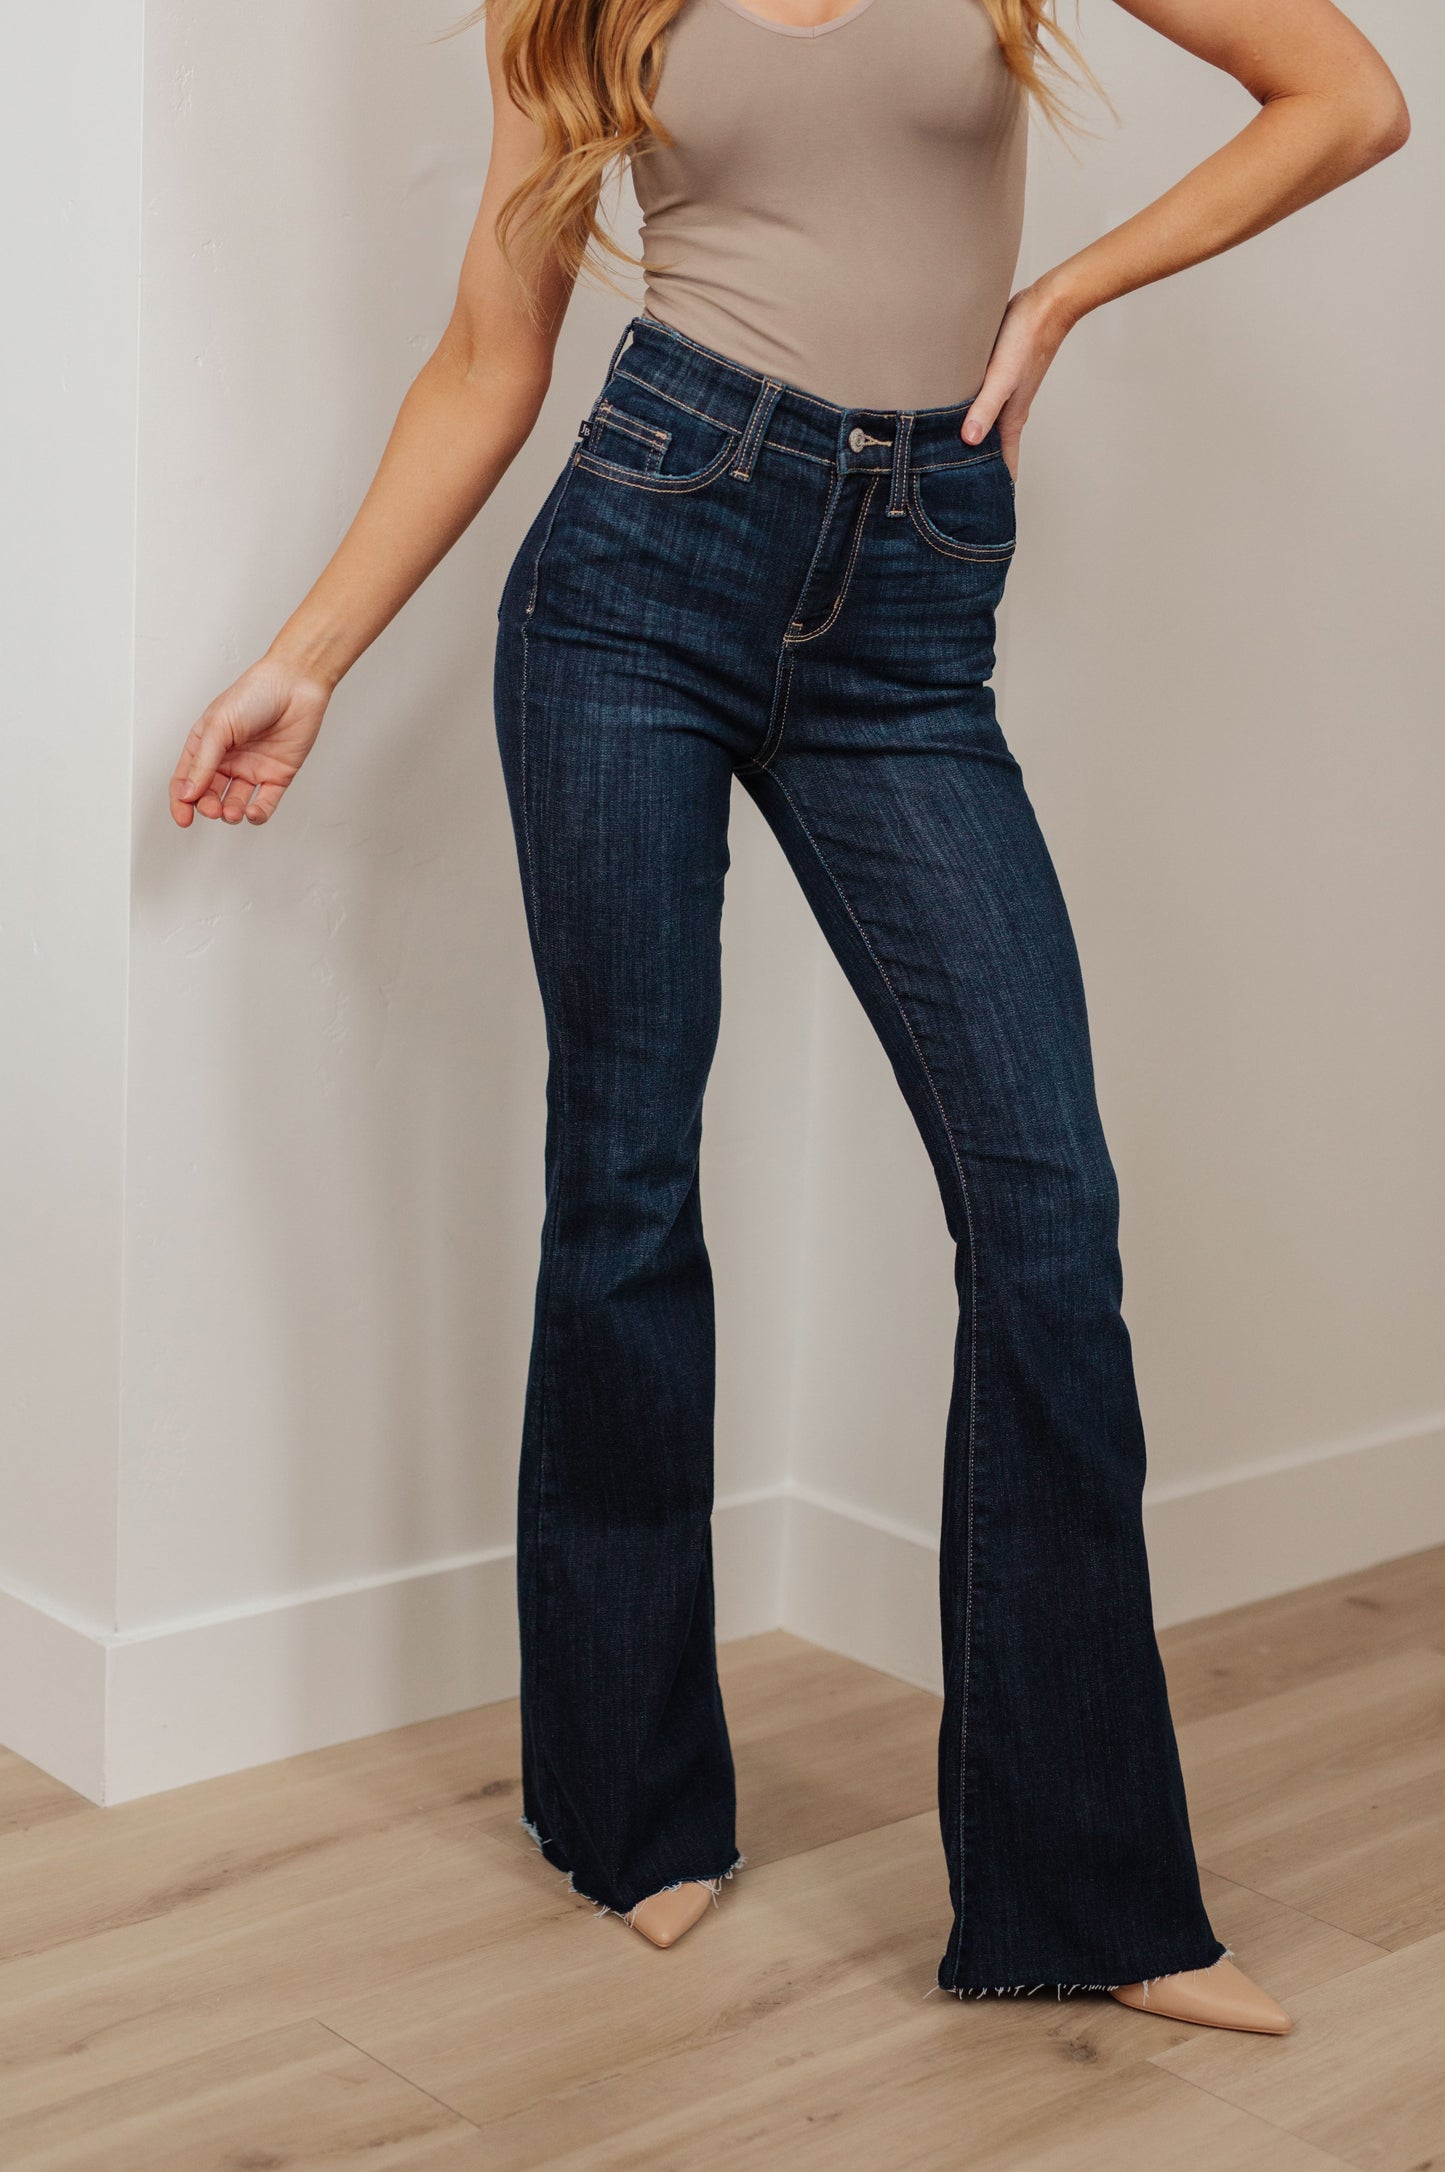 Our Jane High Rise Raw Hem Flare Jeans from Judy Blue are the perfect piece for any wardrobe. The high-rise design offers increased coverage, while the dark wash, classic flared silhouette and raw hem provide a timeless and effortless look. A great addition to any outfit. 0 - 24